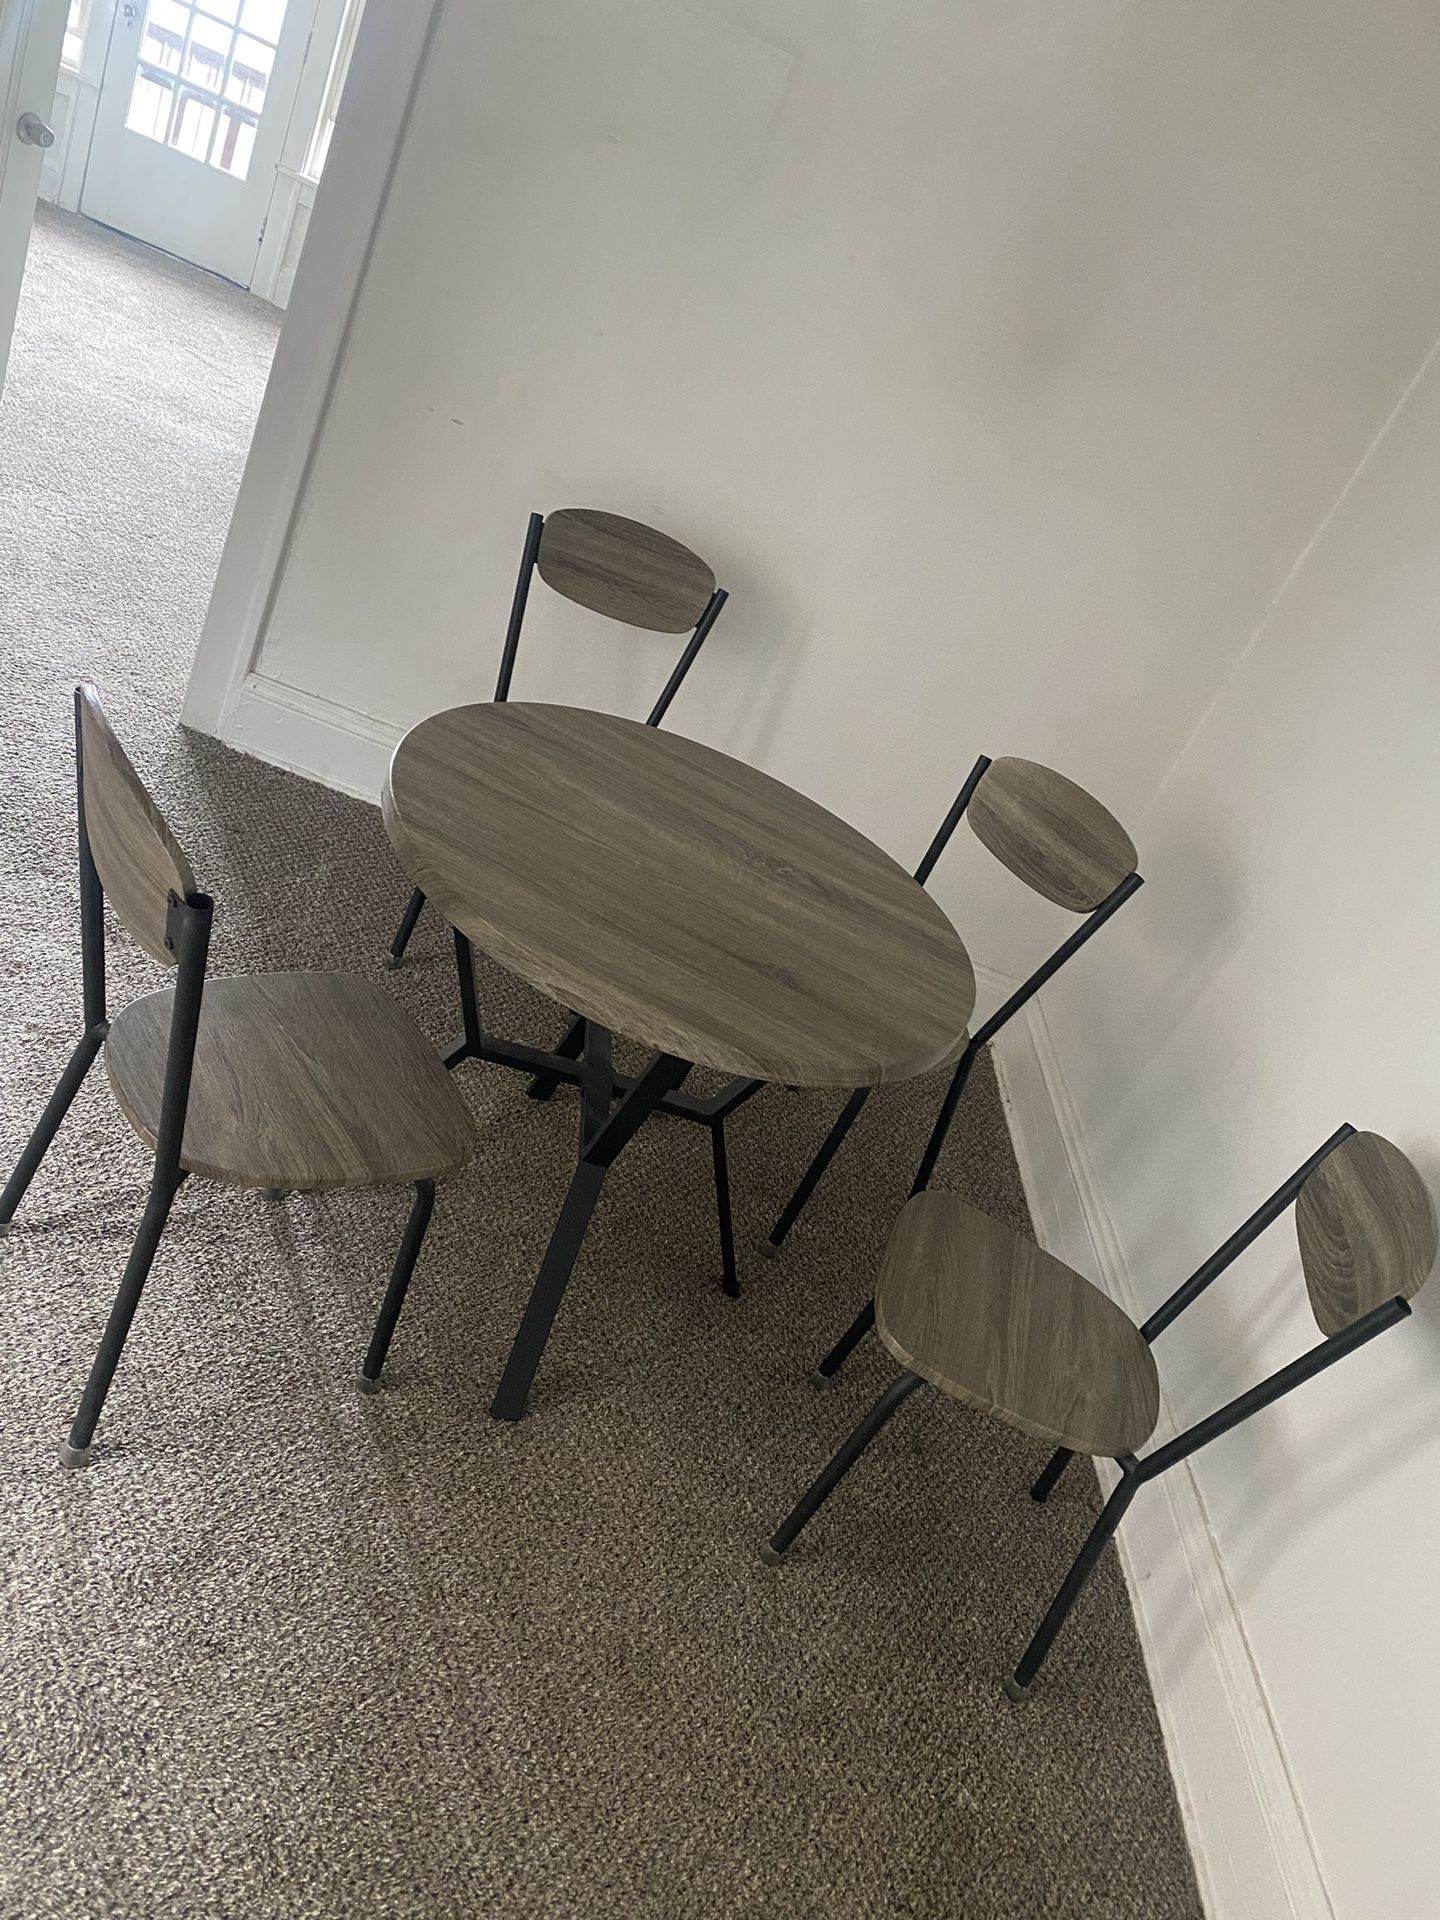 Nice Dining Room Table w 4 Chairs